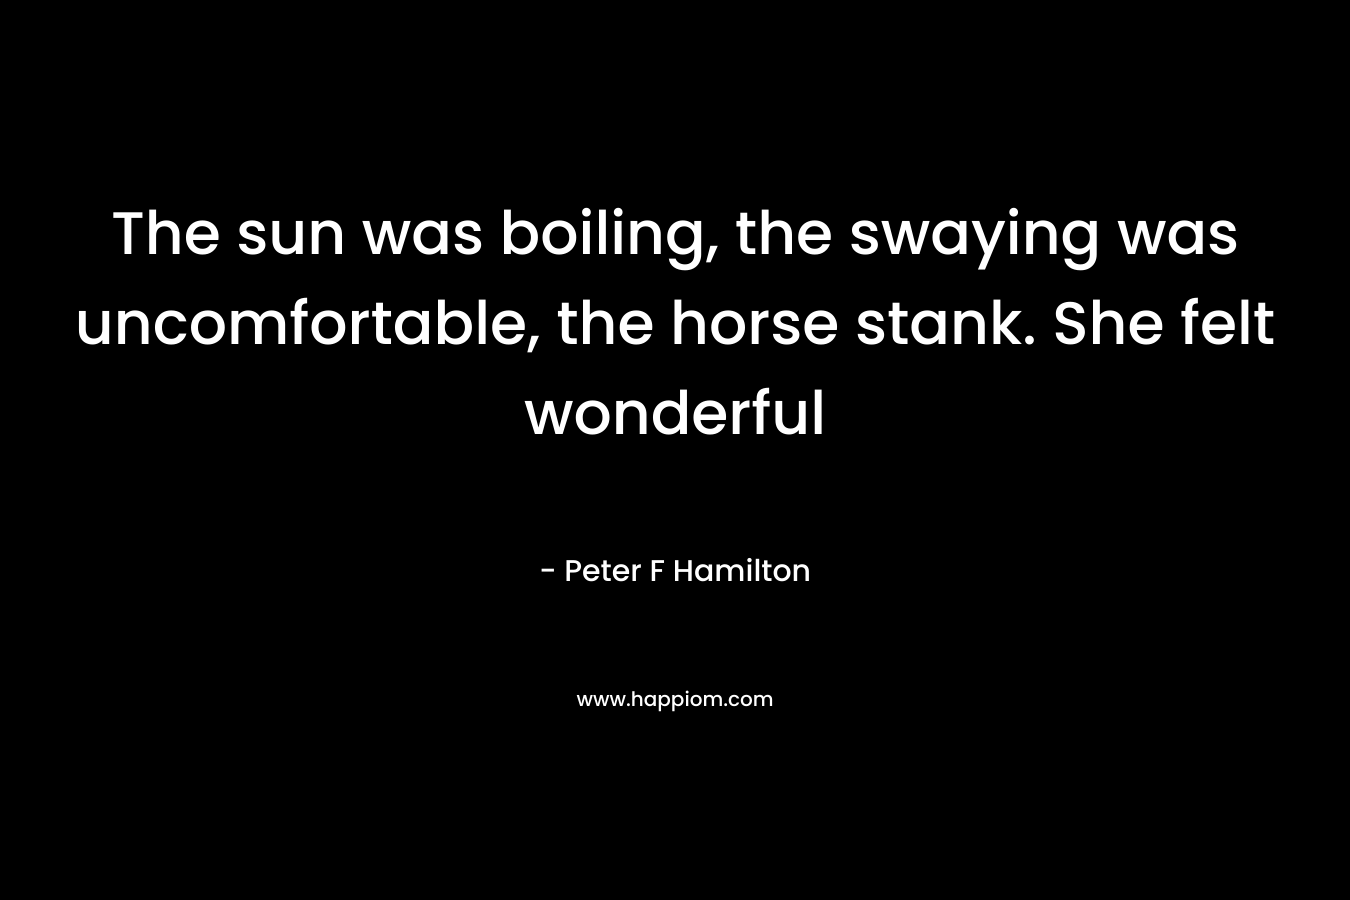 The sun was boiling, the swaying was uncomfortable, the horse stank. She felt wonderful – Peter F Hamilton